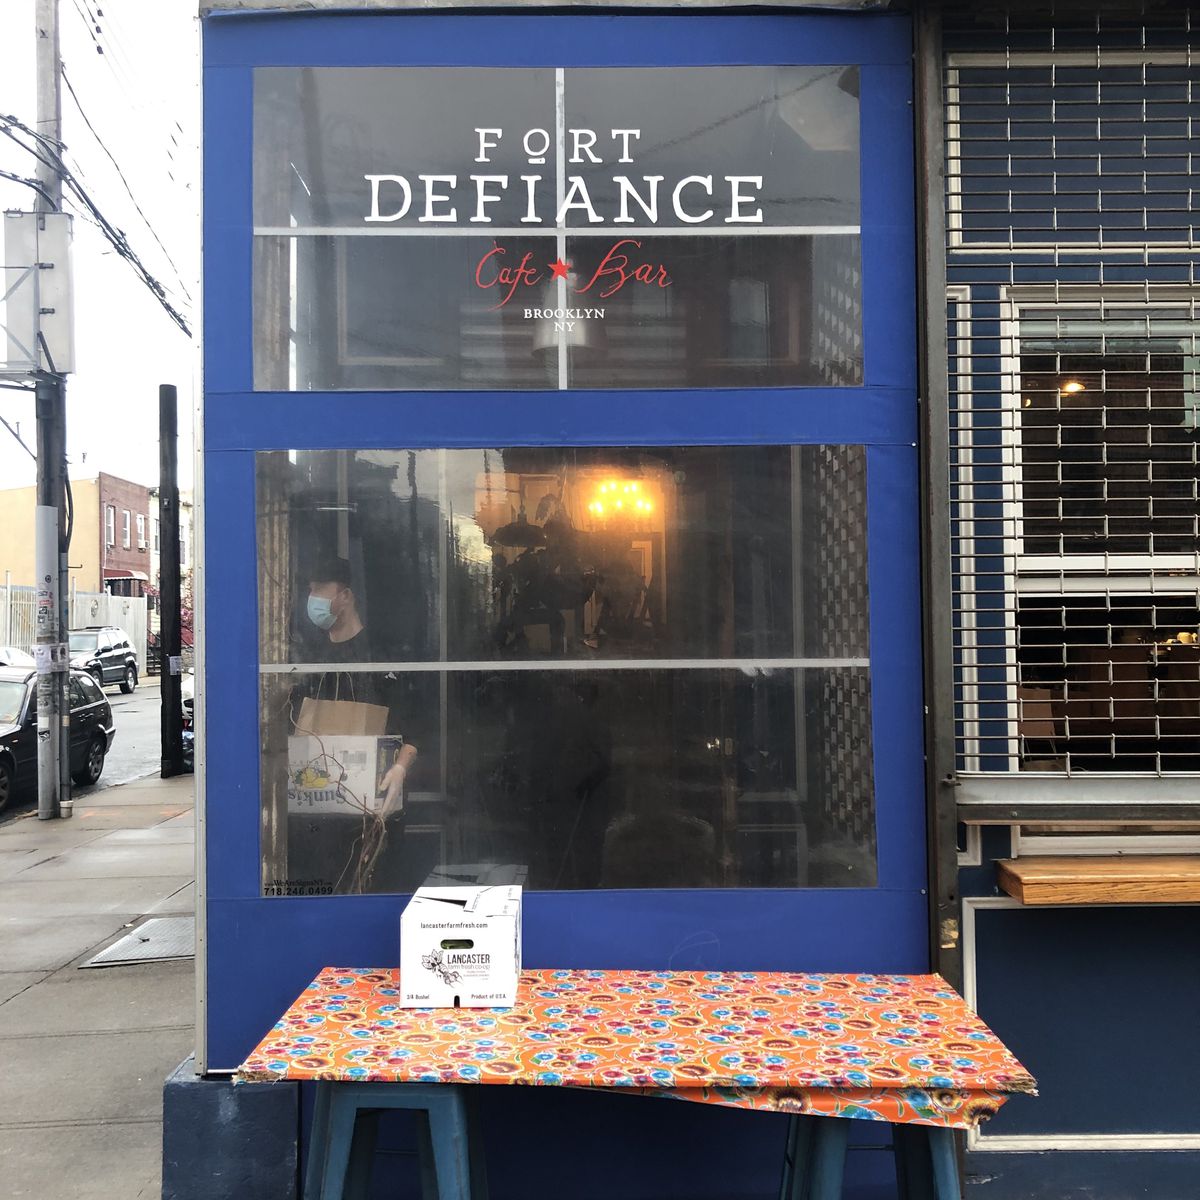 The exterior of a restaurant with a blue insulation box in the front and a table set outside of it